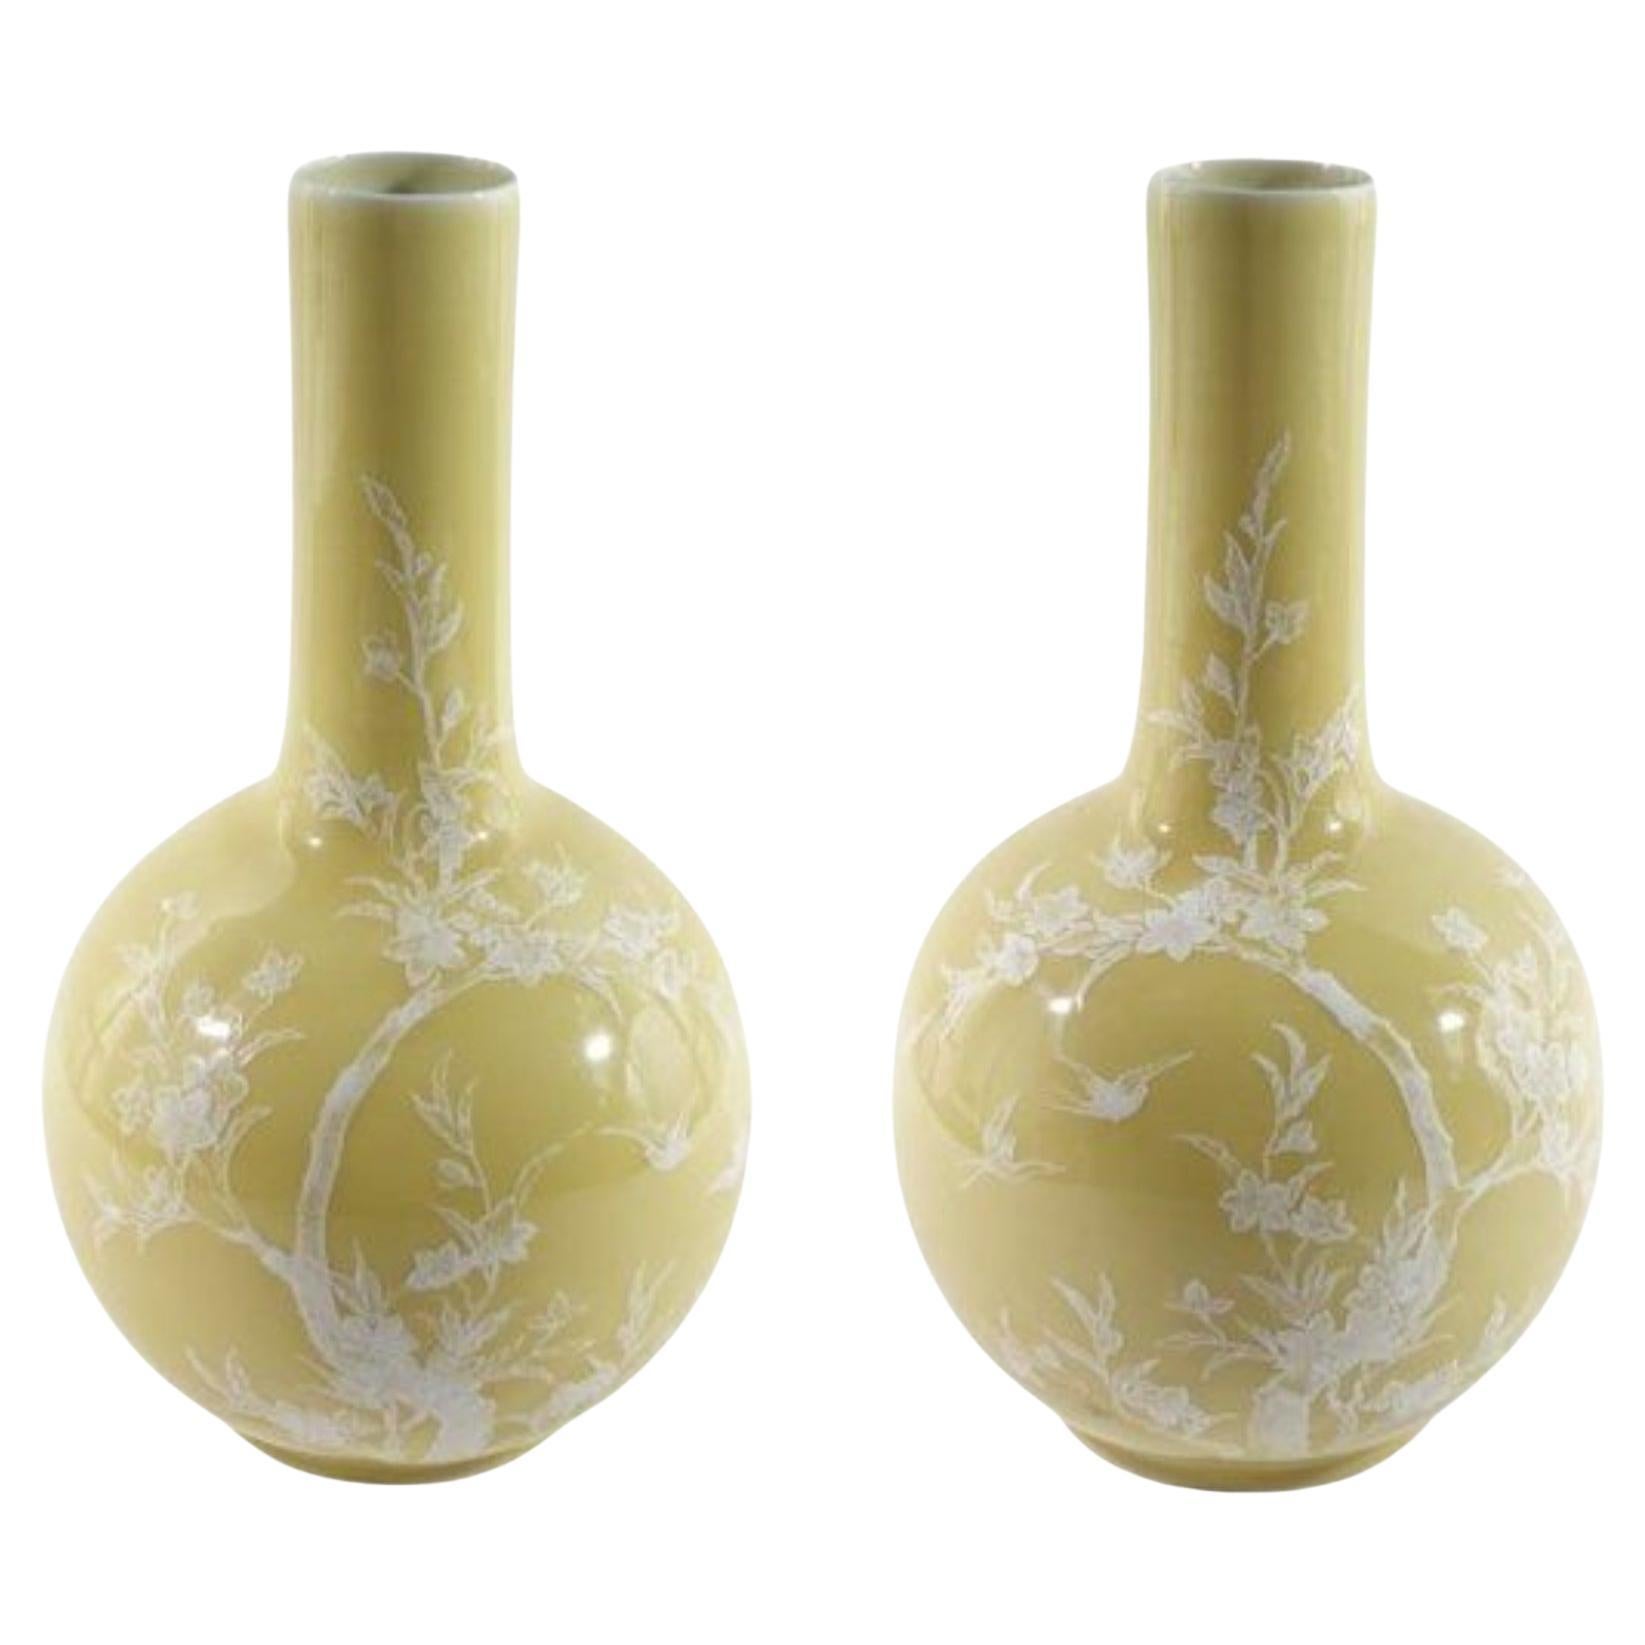 Pair of Beautiful Gold and White Chinese Midcentury Porcelain Vases For Sale